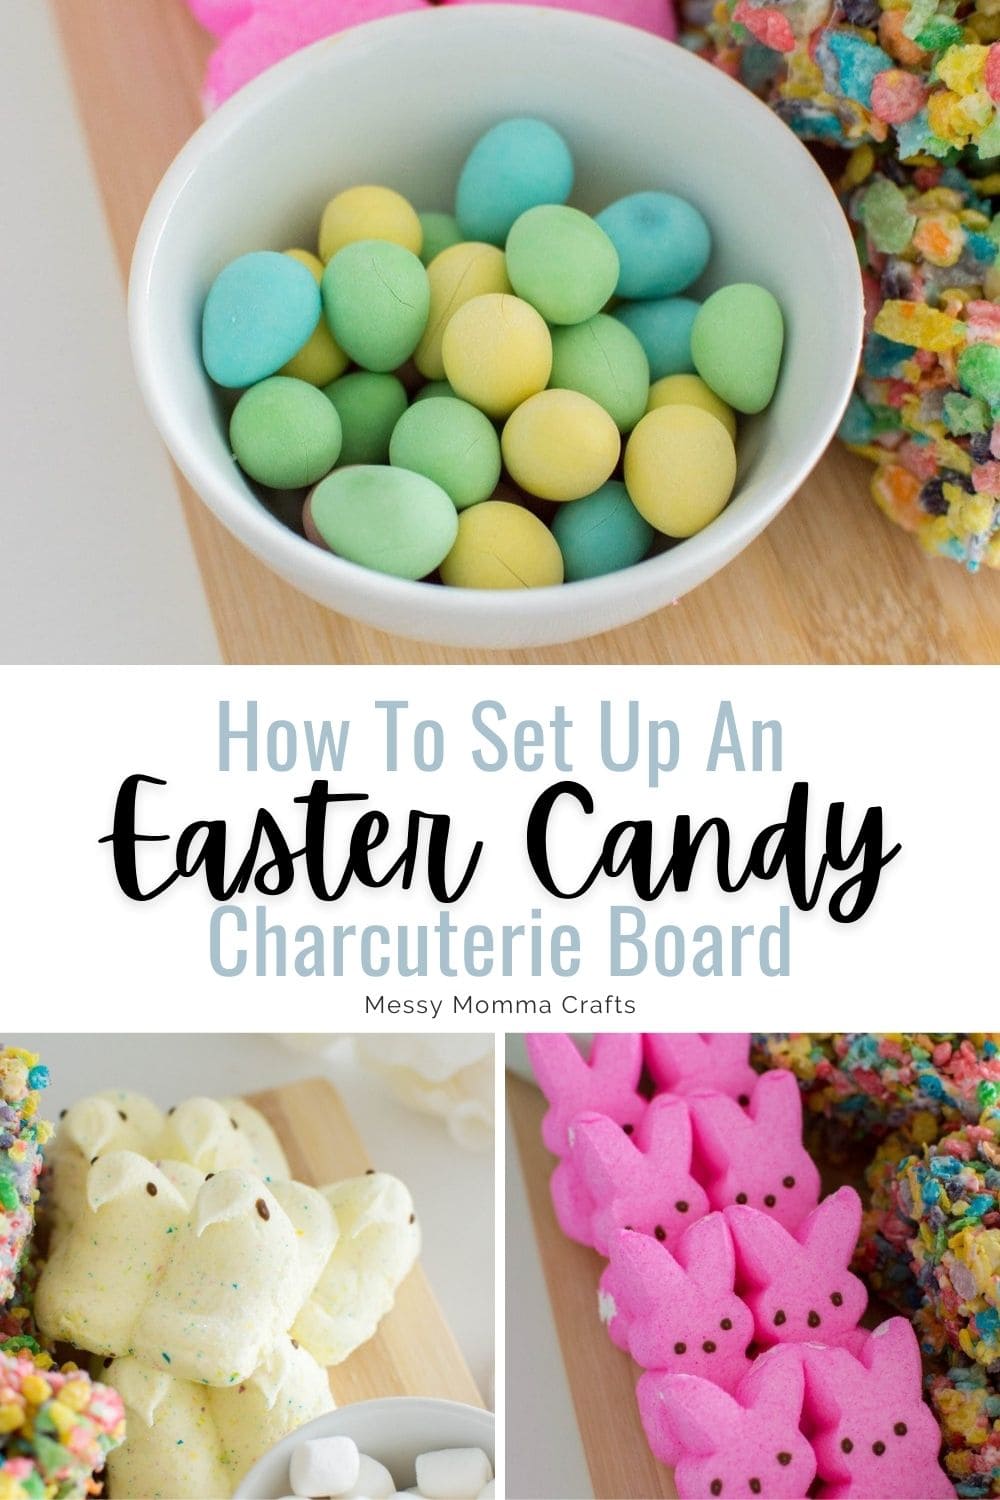 How to set up an Easter candy charcuterie board.